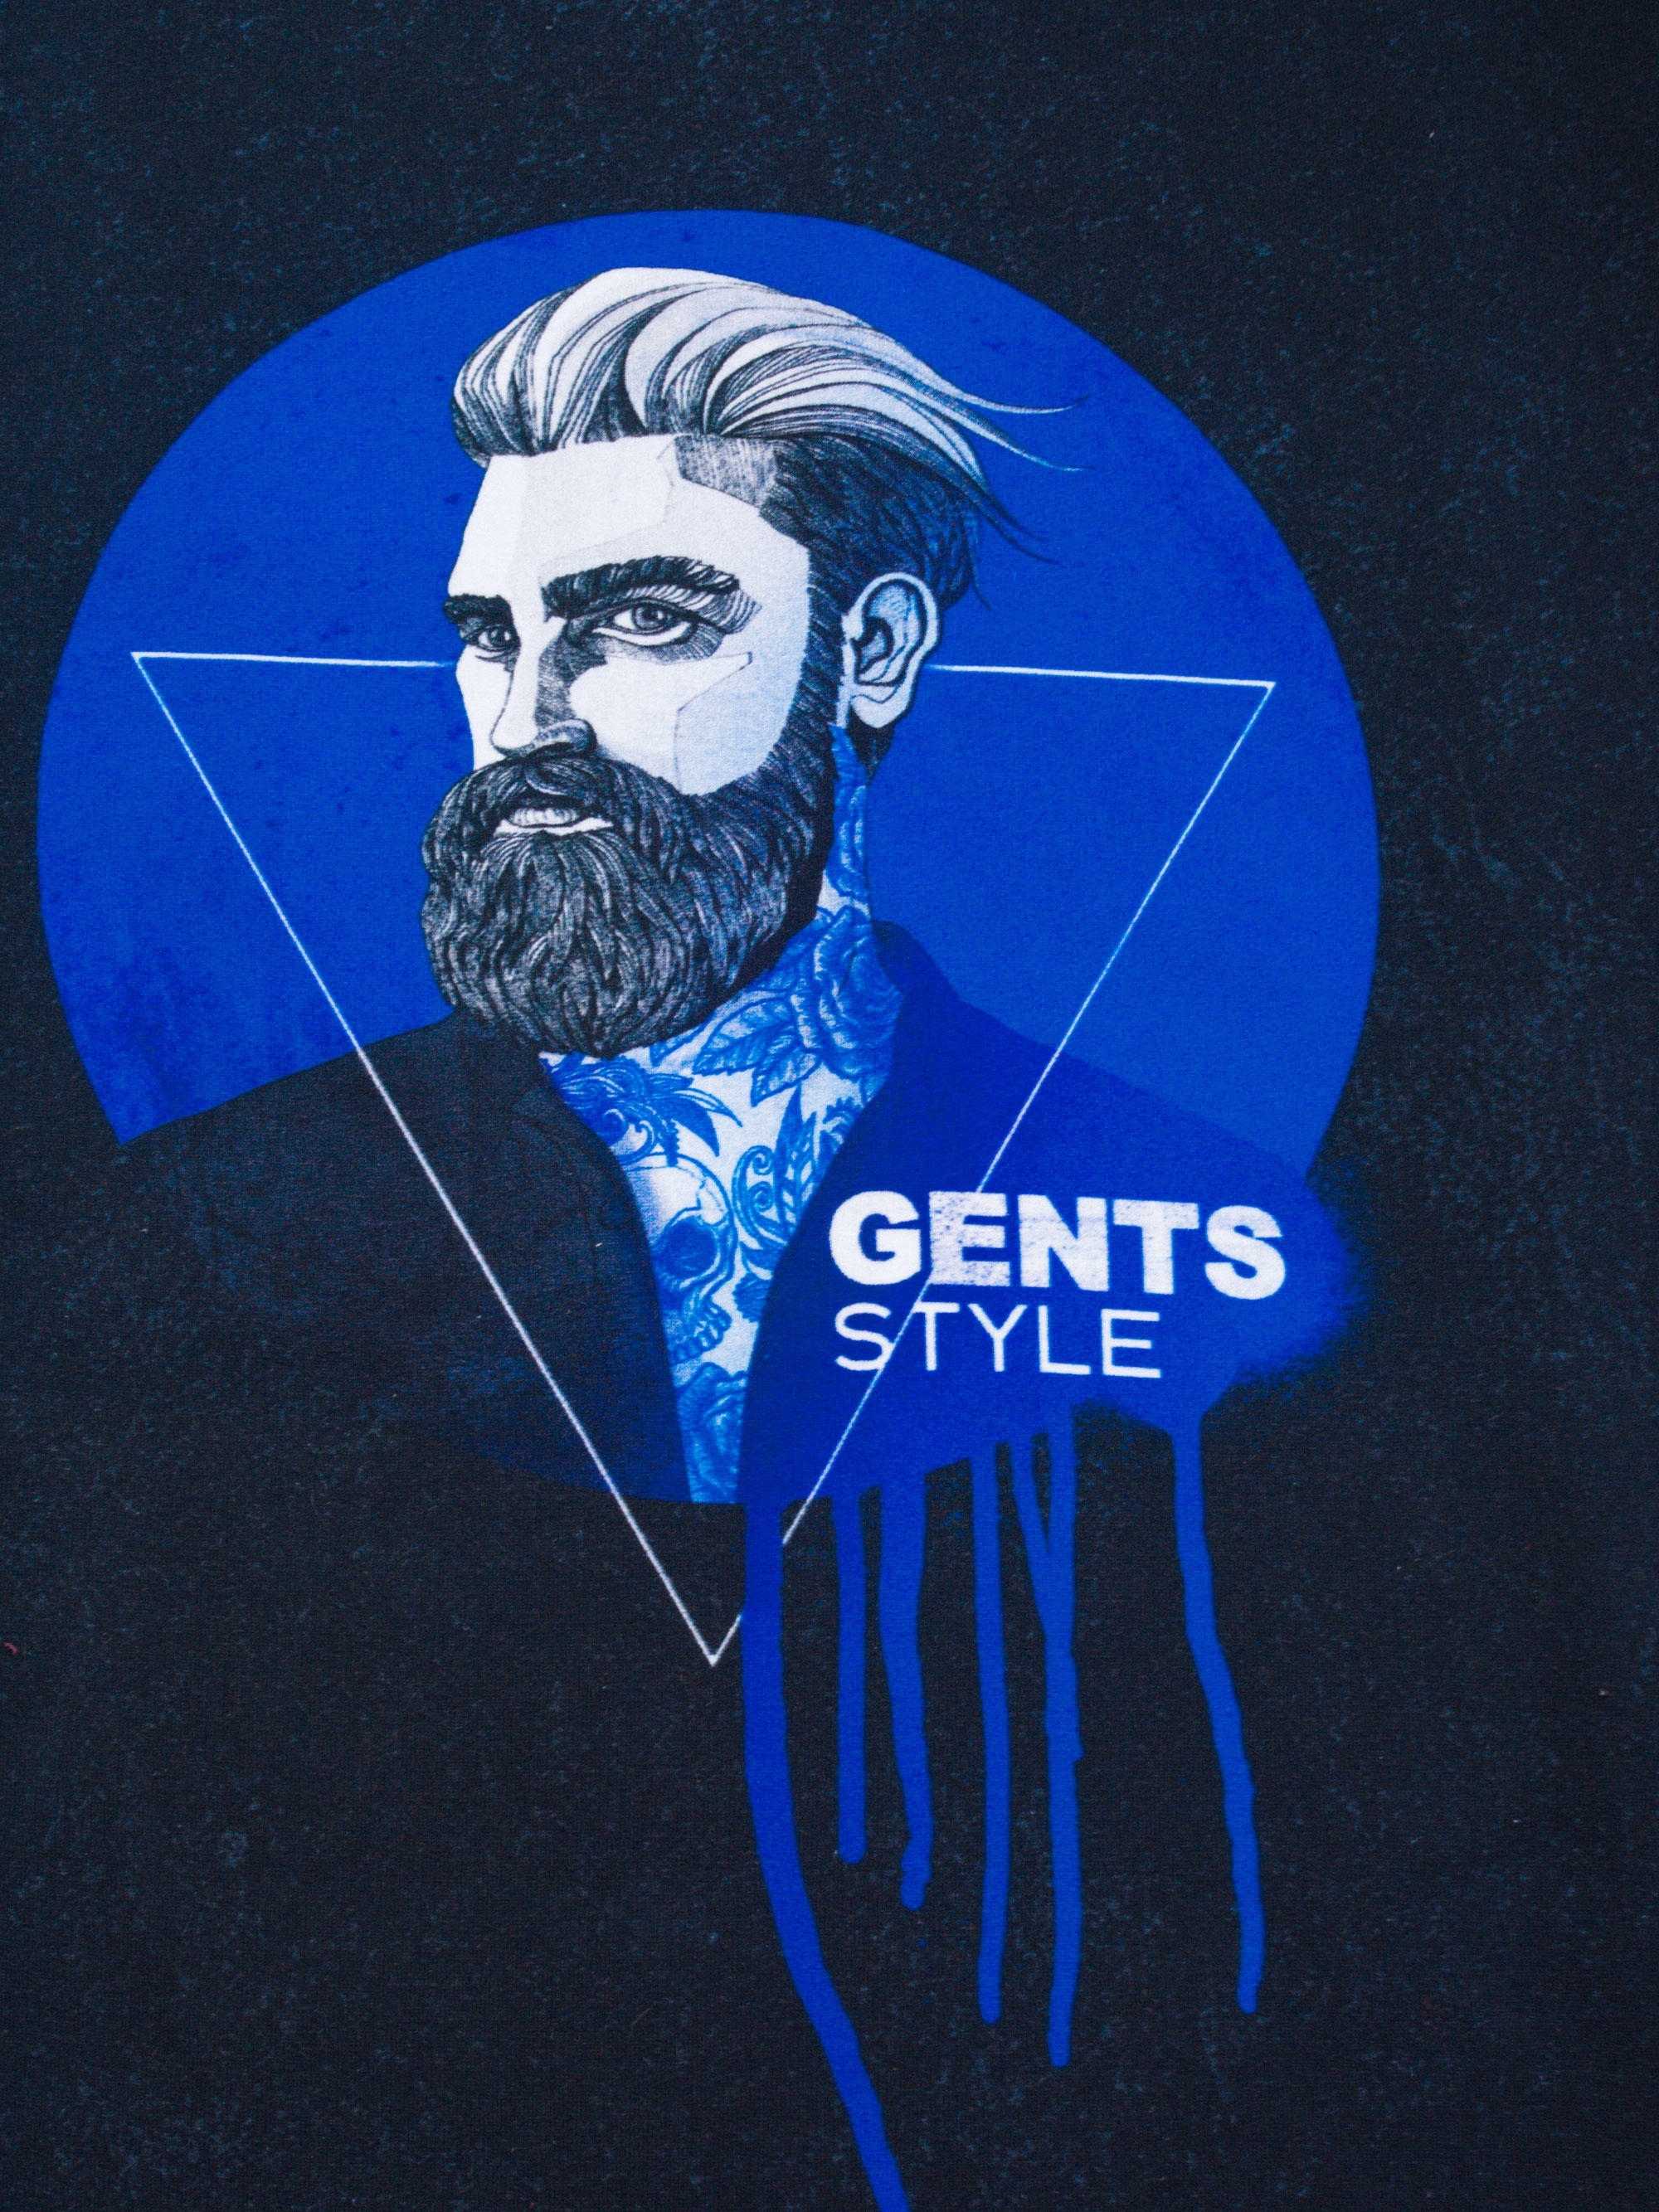 French Terry Panel "Gentlemen Style" by Thorsten Berger 